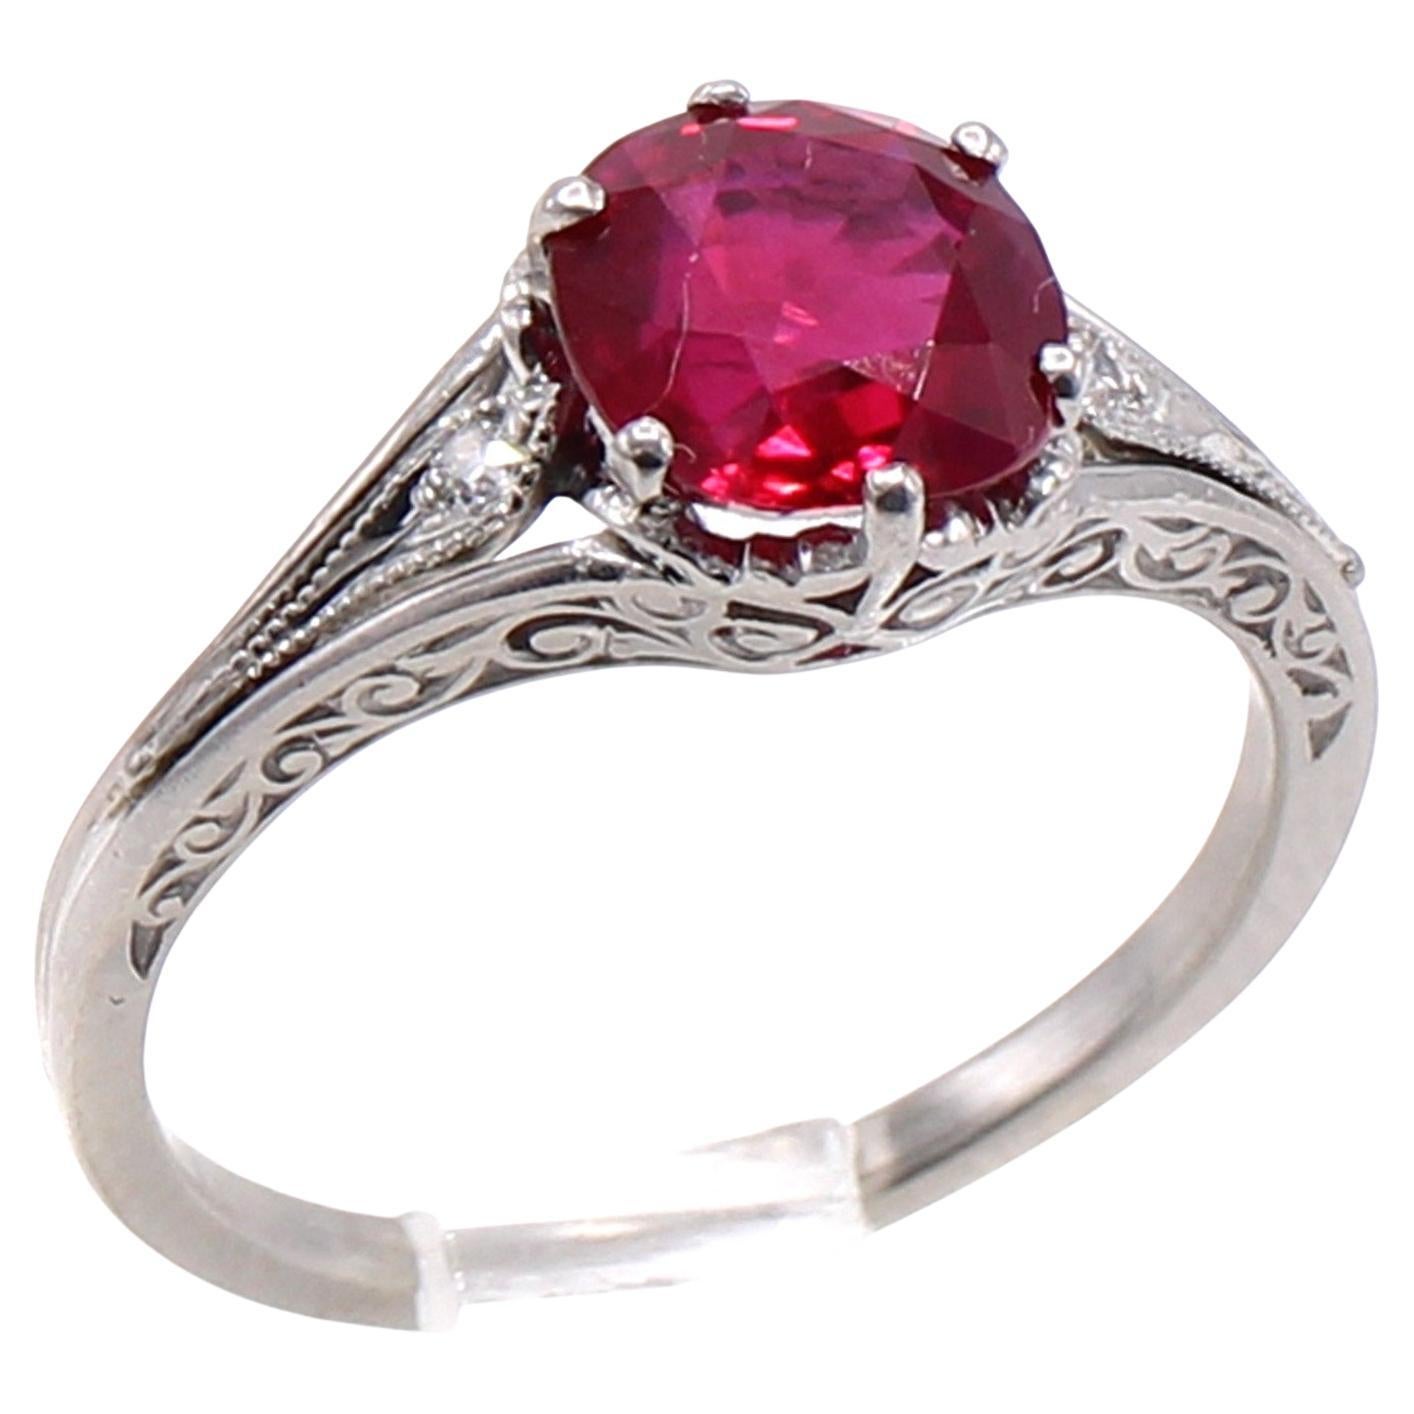 Art Deco platinum hand-made ring featuring a 1.70 carat Burma ruby. This pigeon blood red ruby has an amazing color saturation, brilliancy and clarity. The ruby is accompanied by a report from AGL stating the origin as Burma. The finely azured and